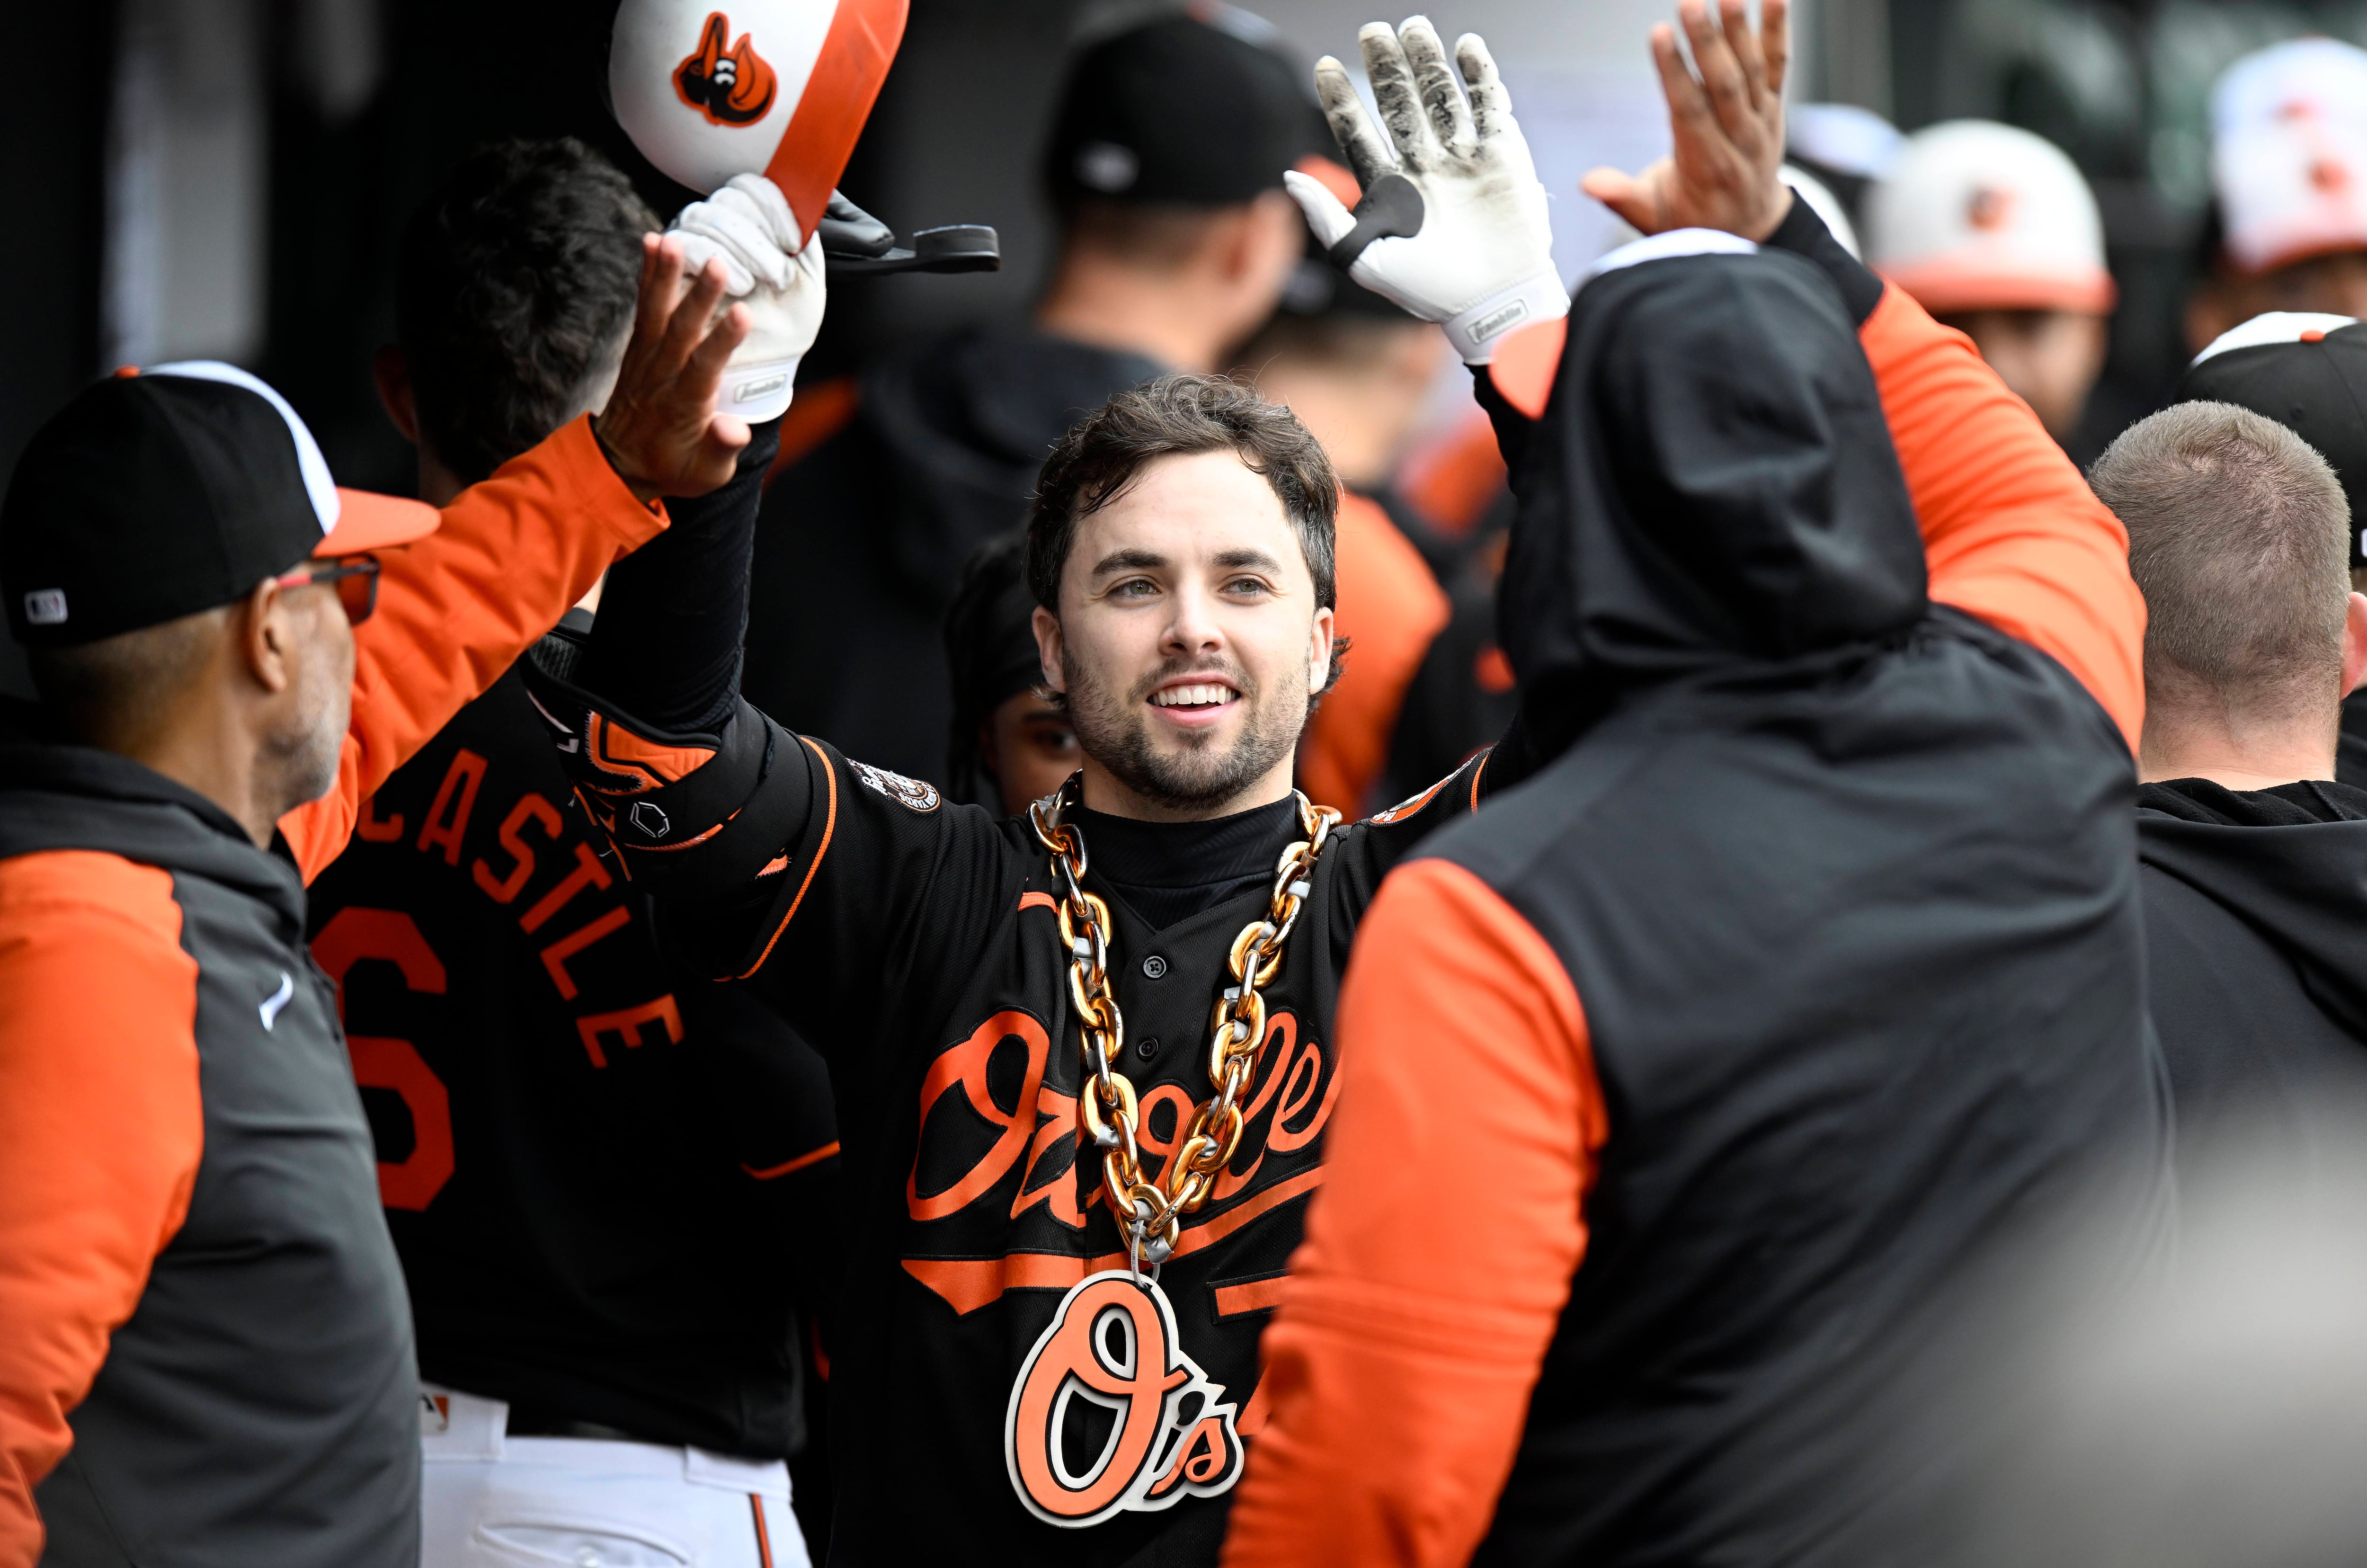 BALTIMORE, MARYLAND - OCTOBER 05: Terrin Vavra #77 of the Baltimore Orioles celebrates with teammates after hitting a three-run home run for his first career home run in the eighth inning against the Toronto Blue Jays during game one of a doubleheader at Oriole Park at Camden Yards on October 05, 2022 in Baltimore, Maryland.